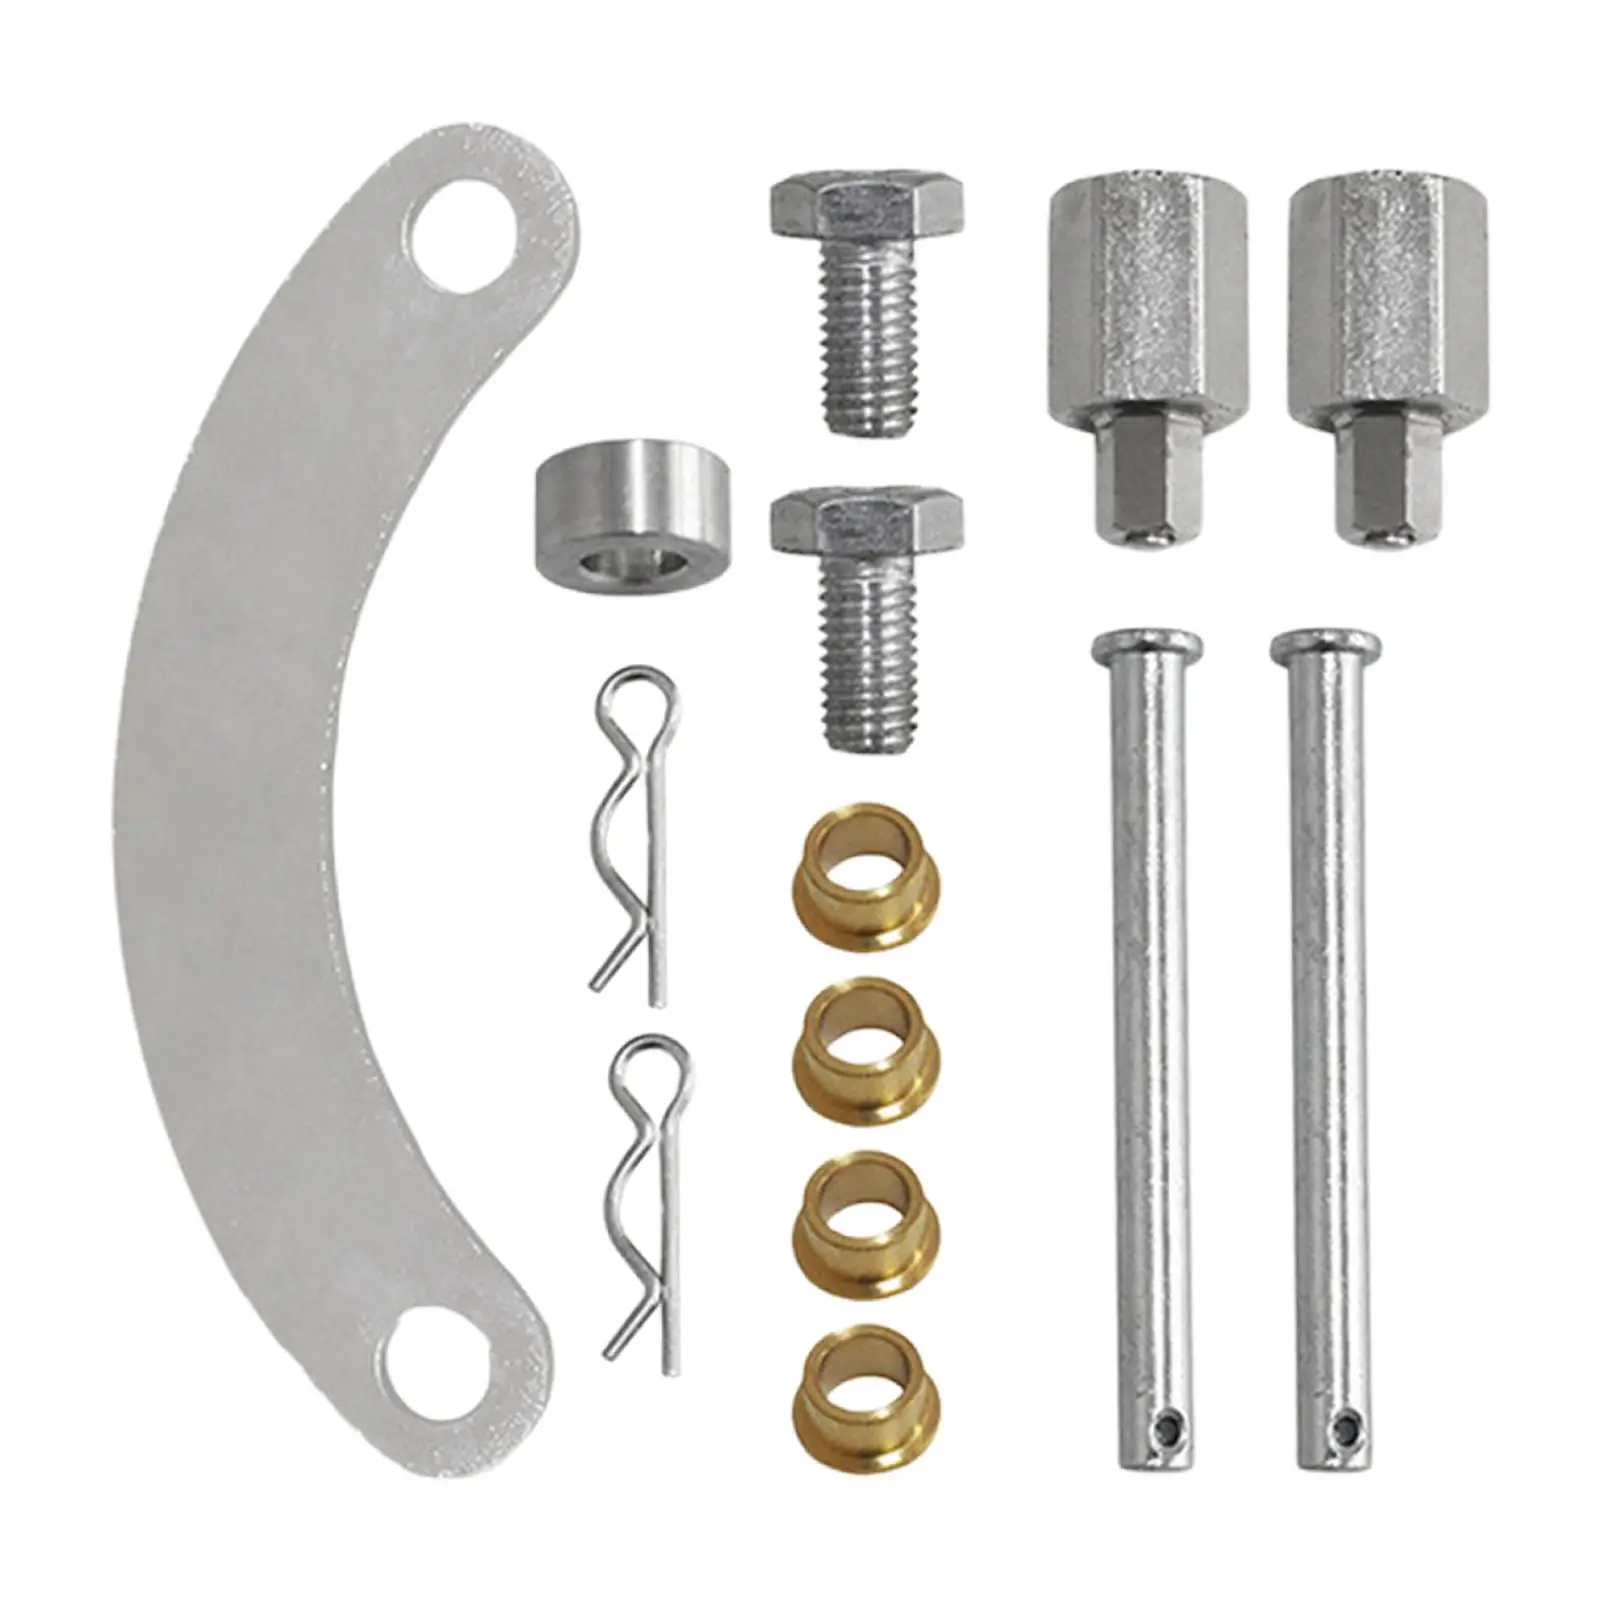 cam Gear Lock Direct Replaces Camlock Tool Accessory Assembly Repair Parts Easy Installation Durable Mounting Hardware